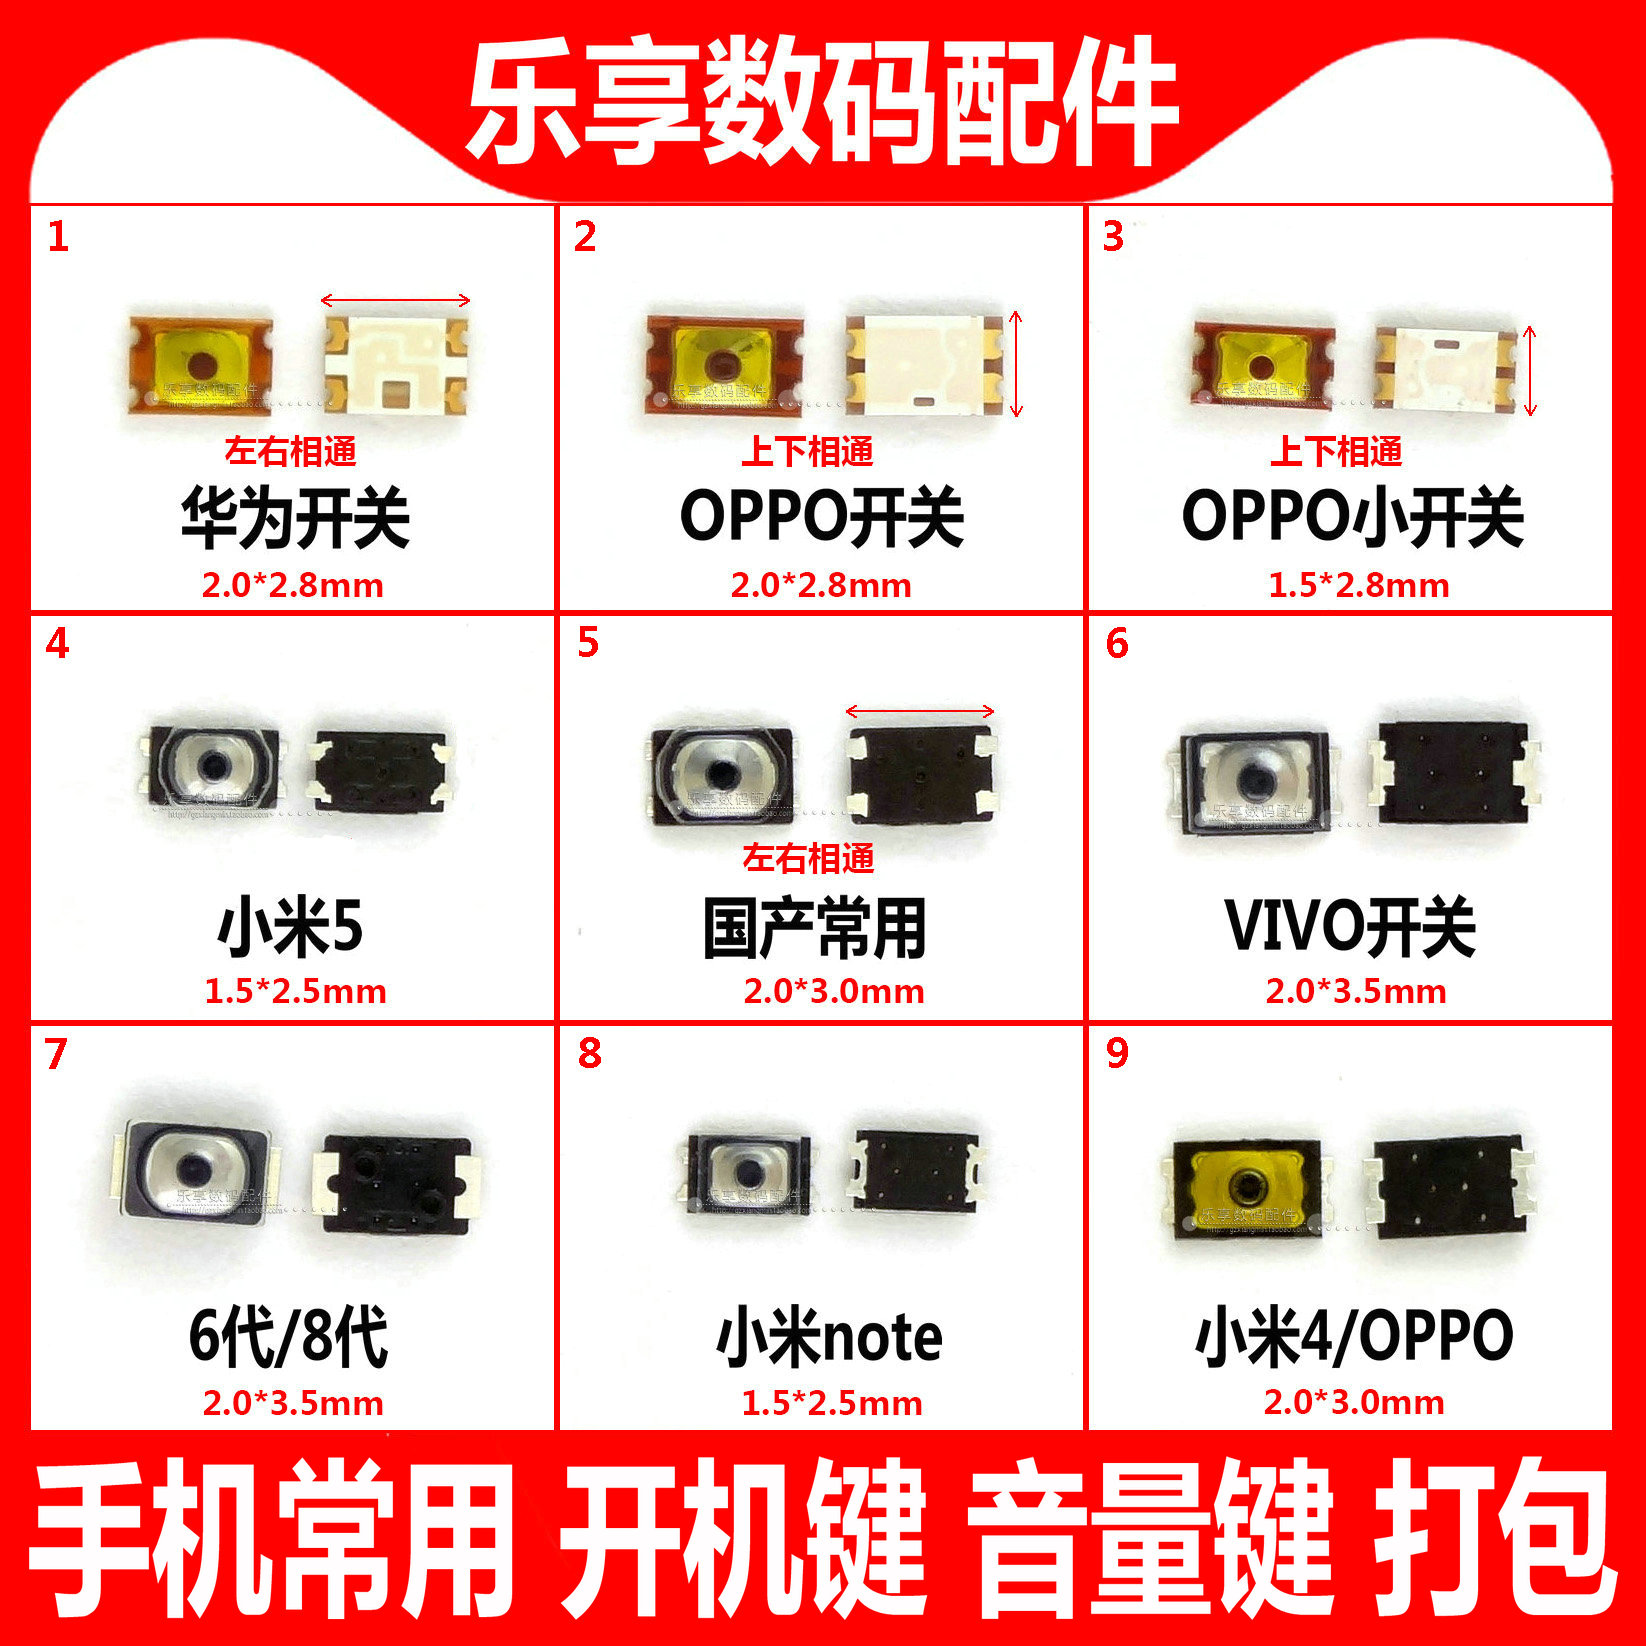 Commonly used mobile phone power on button, key on side button, pop-up button, suitable for Apple, Huawei, OPPO, Xiaomi, VIVO, Honor